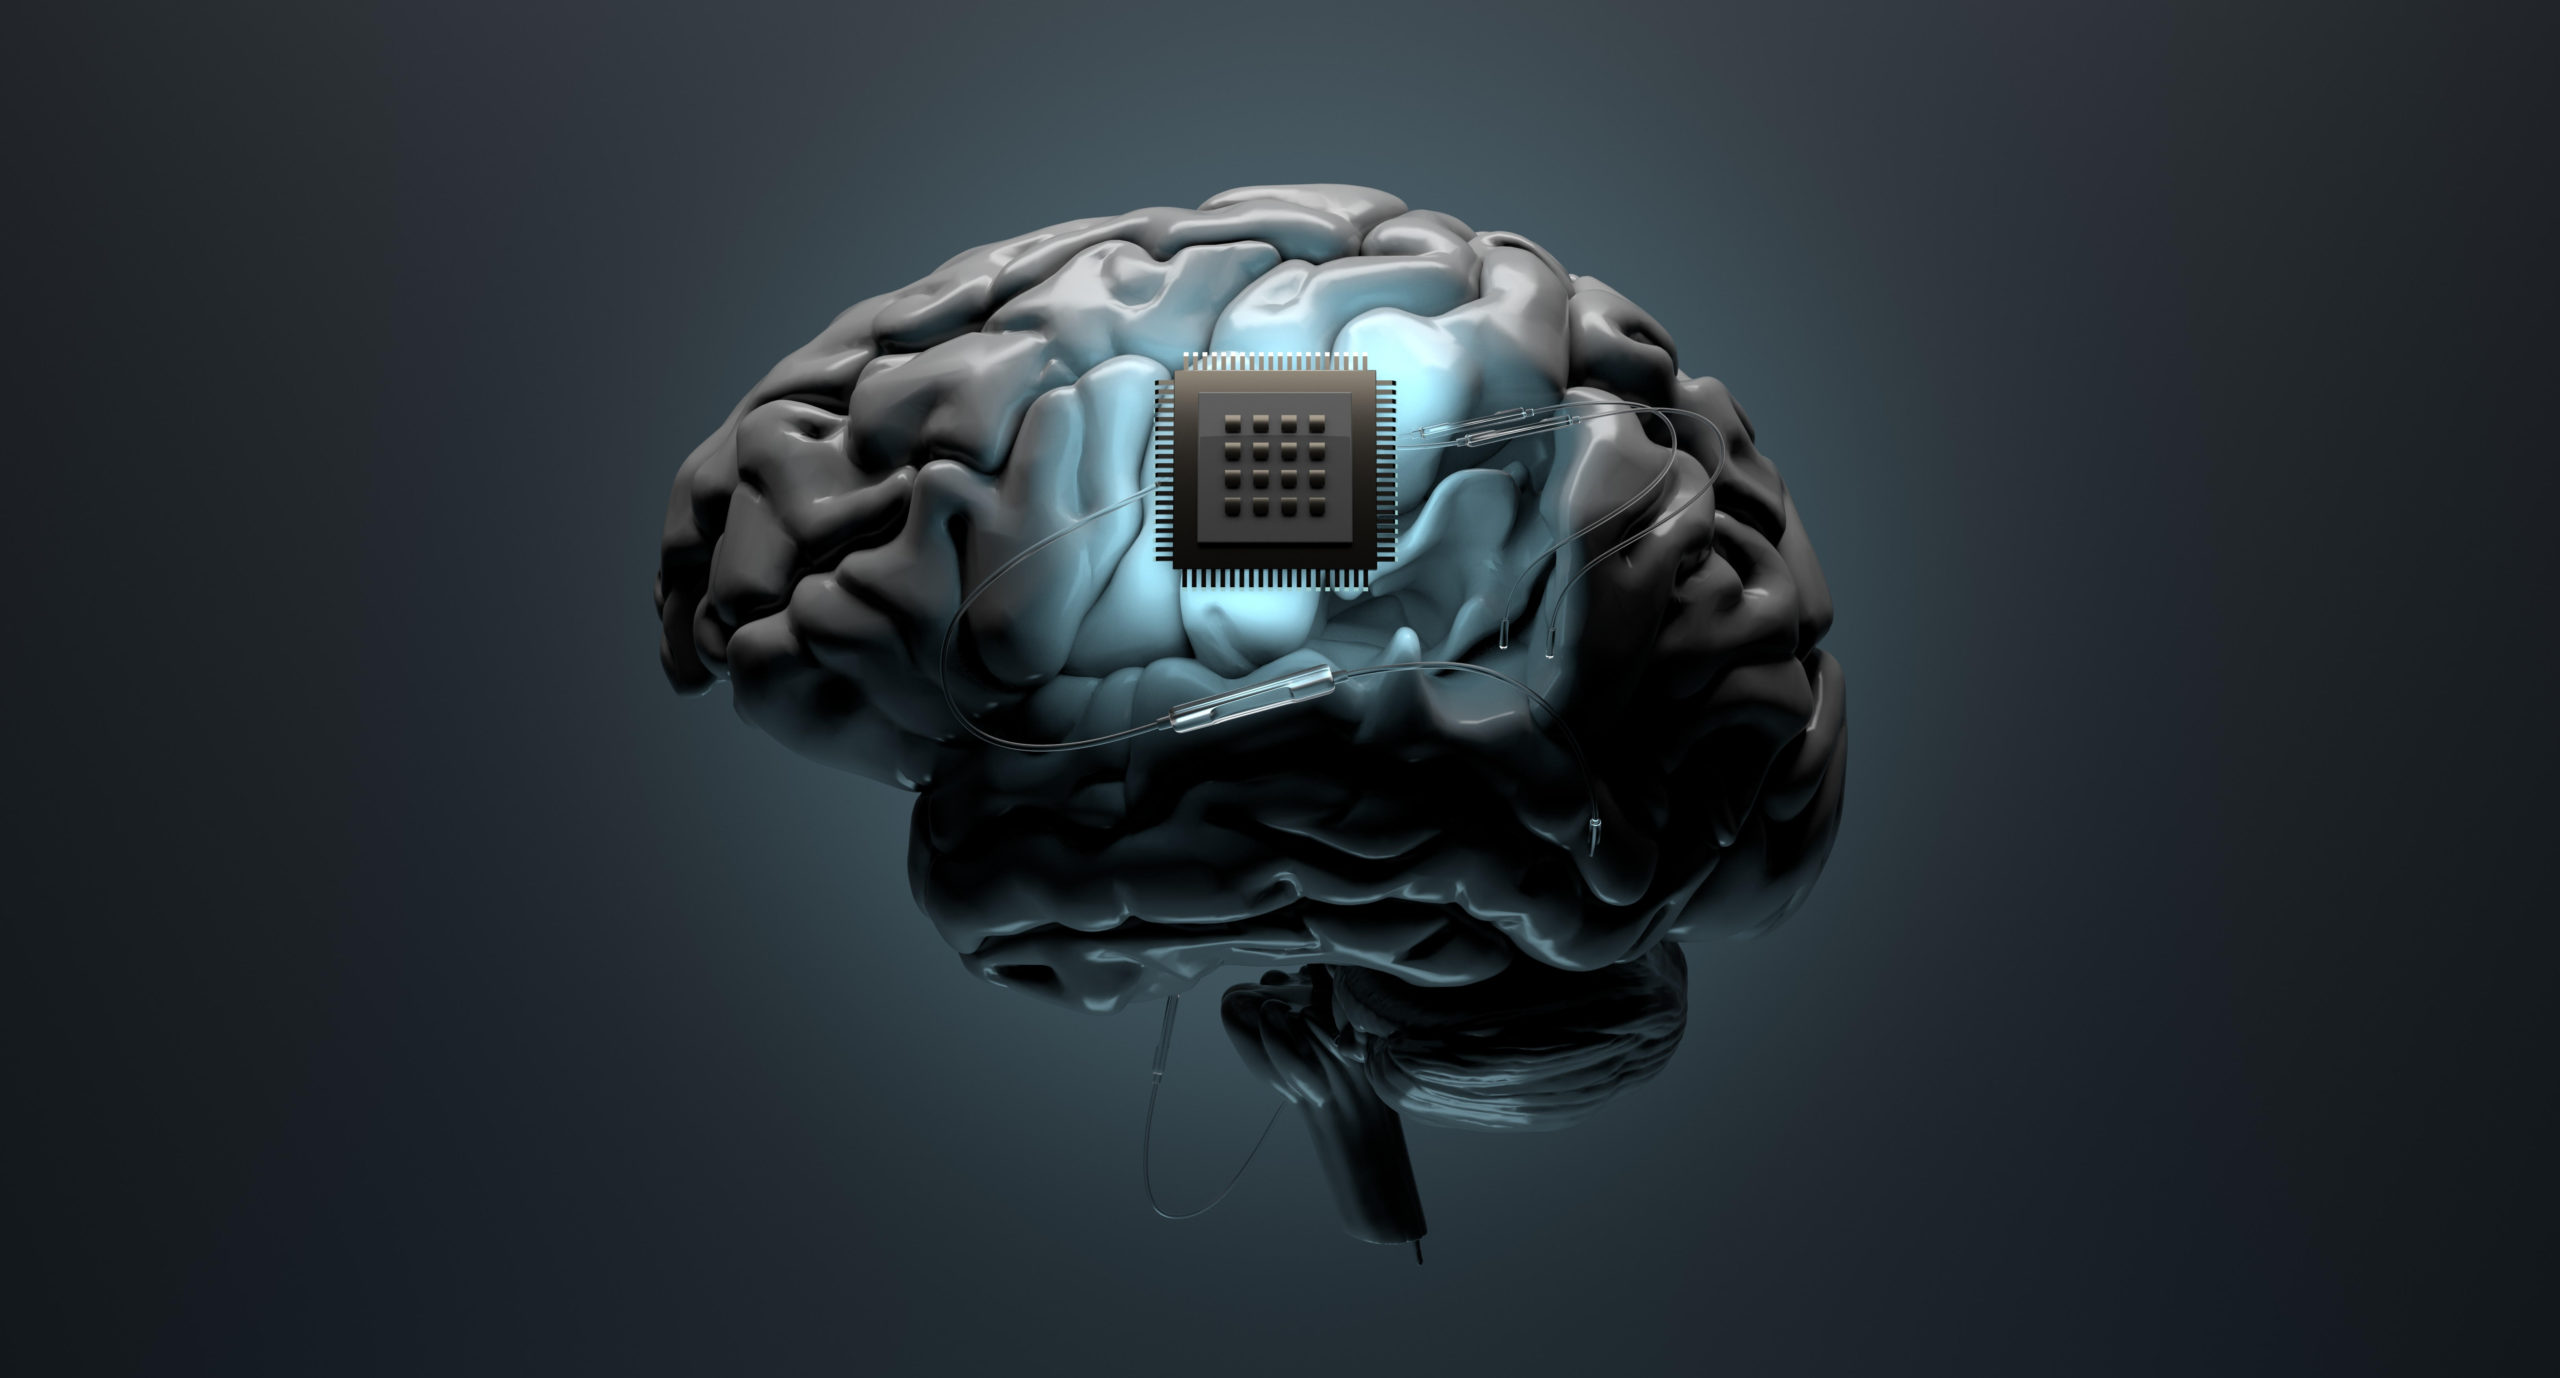 Neurotechnology Webinar: The Potential Applications of Neurotechnology and Games